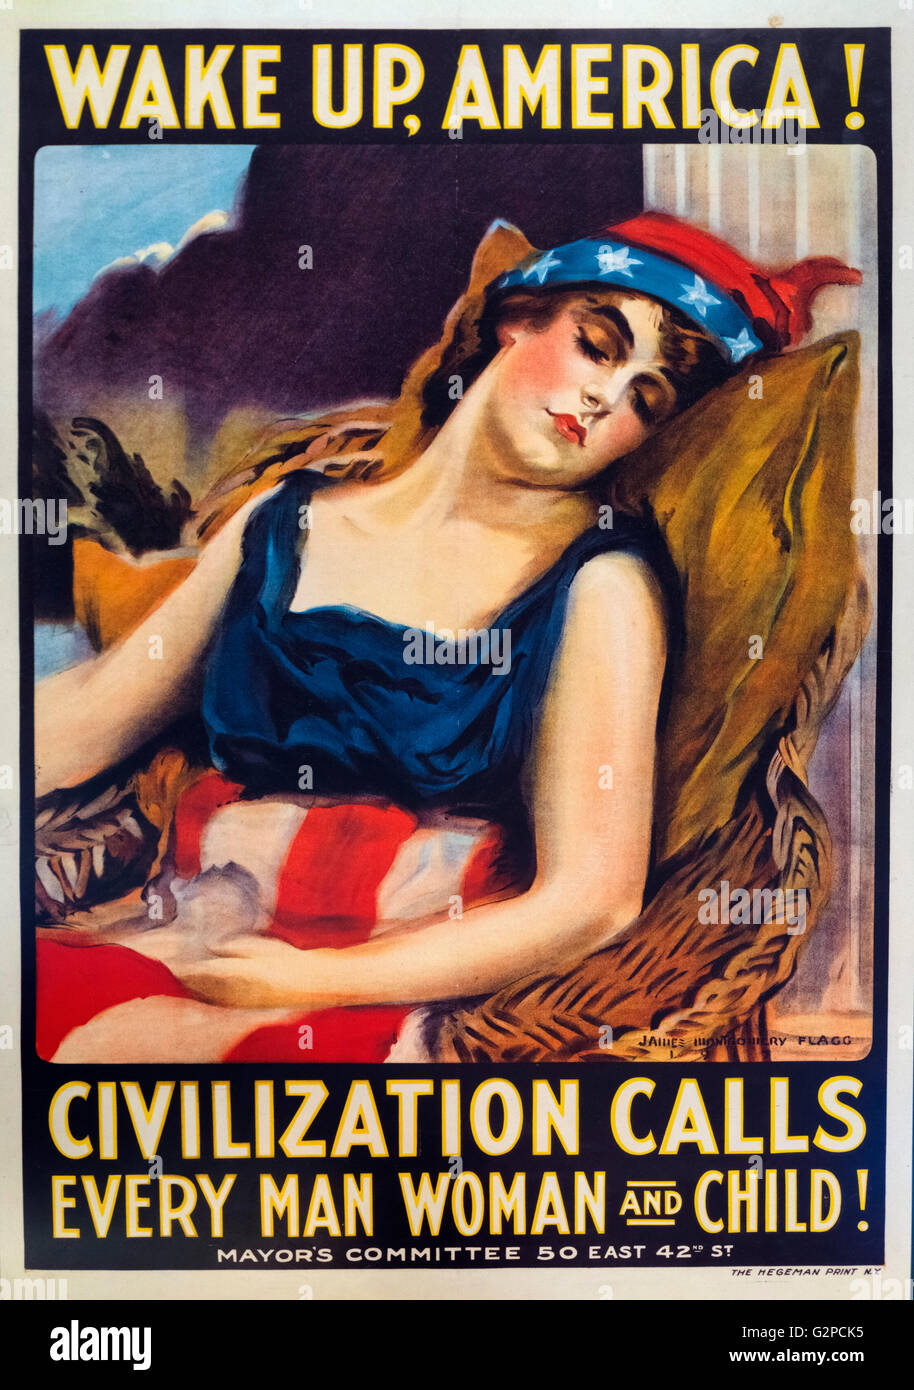 "Wake Up America! Civilization Calls Every Man Woman and Child!", US World War I propaganda poster urging Americans to wake up to the threat of war in Europe. Designed by James Montgomery Flagg, 1917 Stock Photo